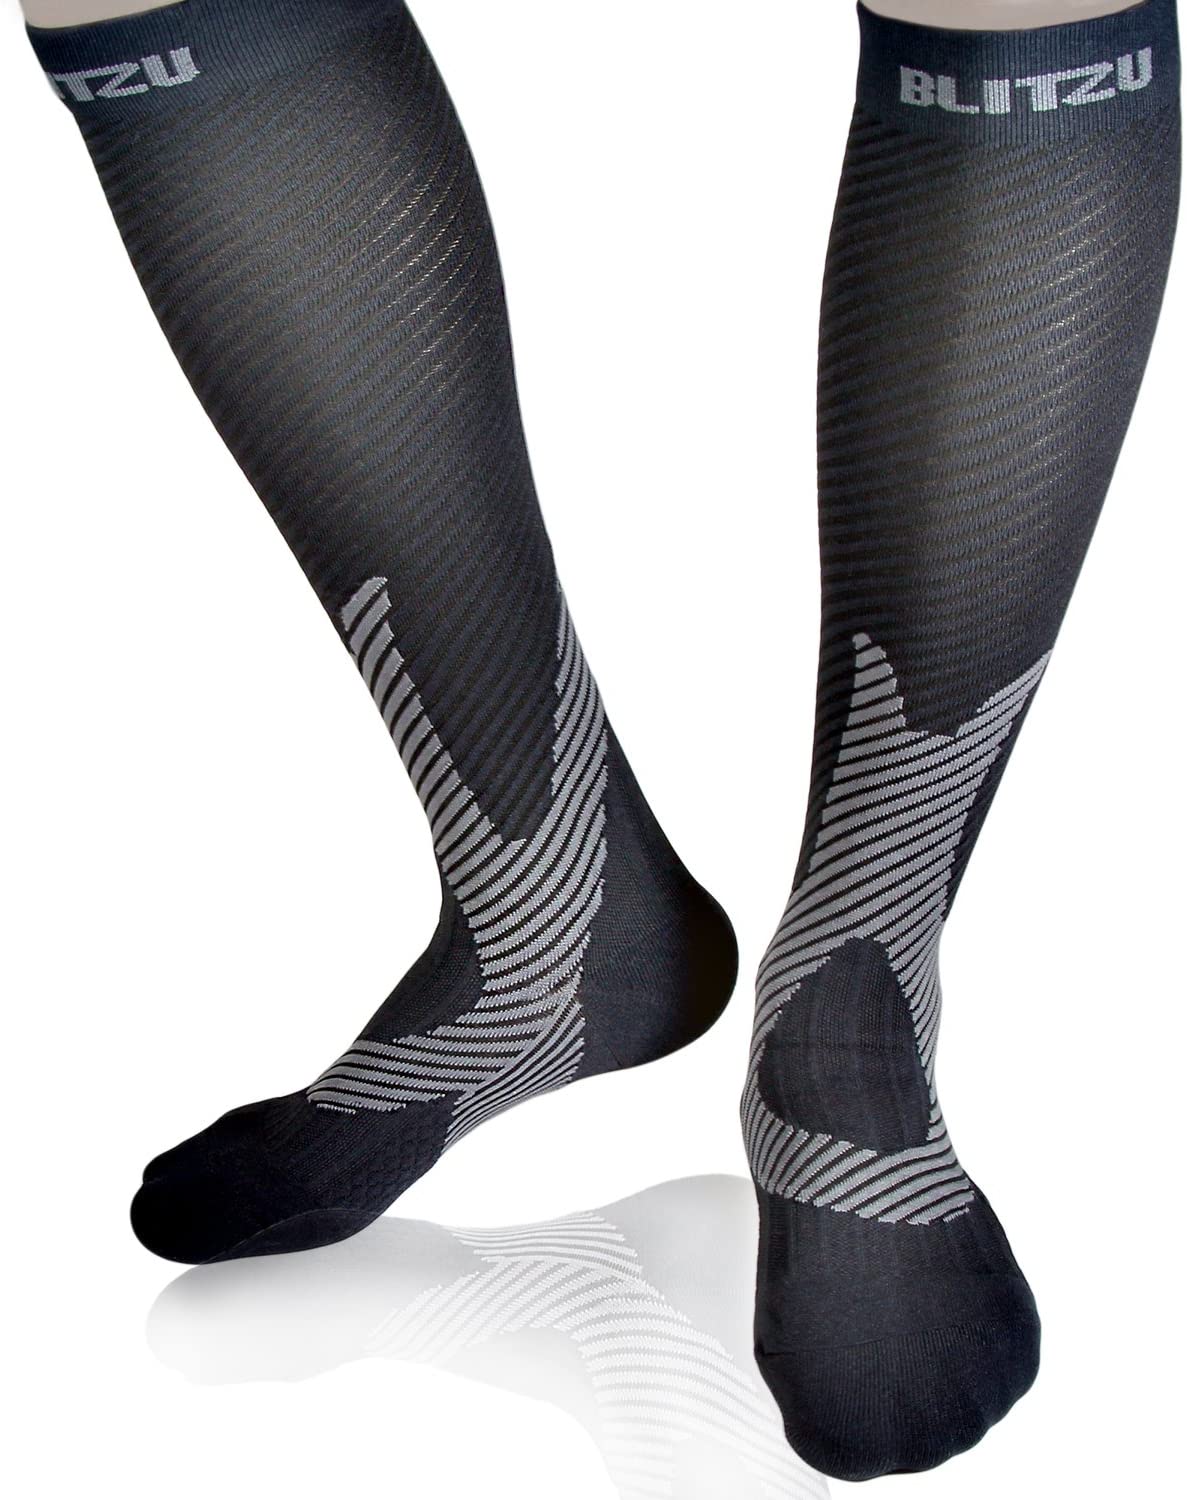 The 10 Best Compression Socks for Men 2023 - For All Workout Types